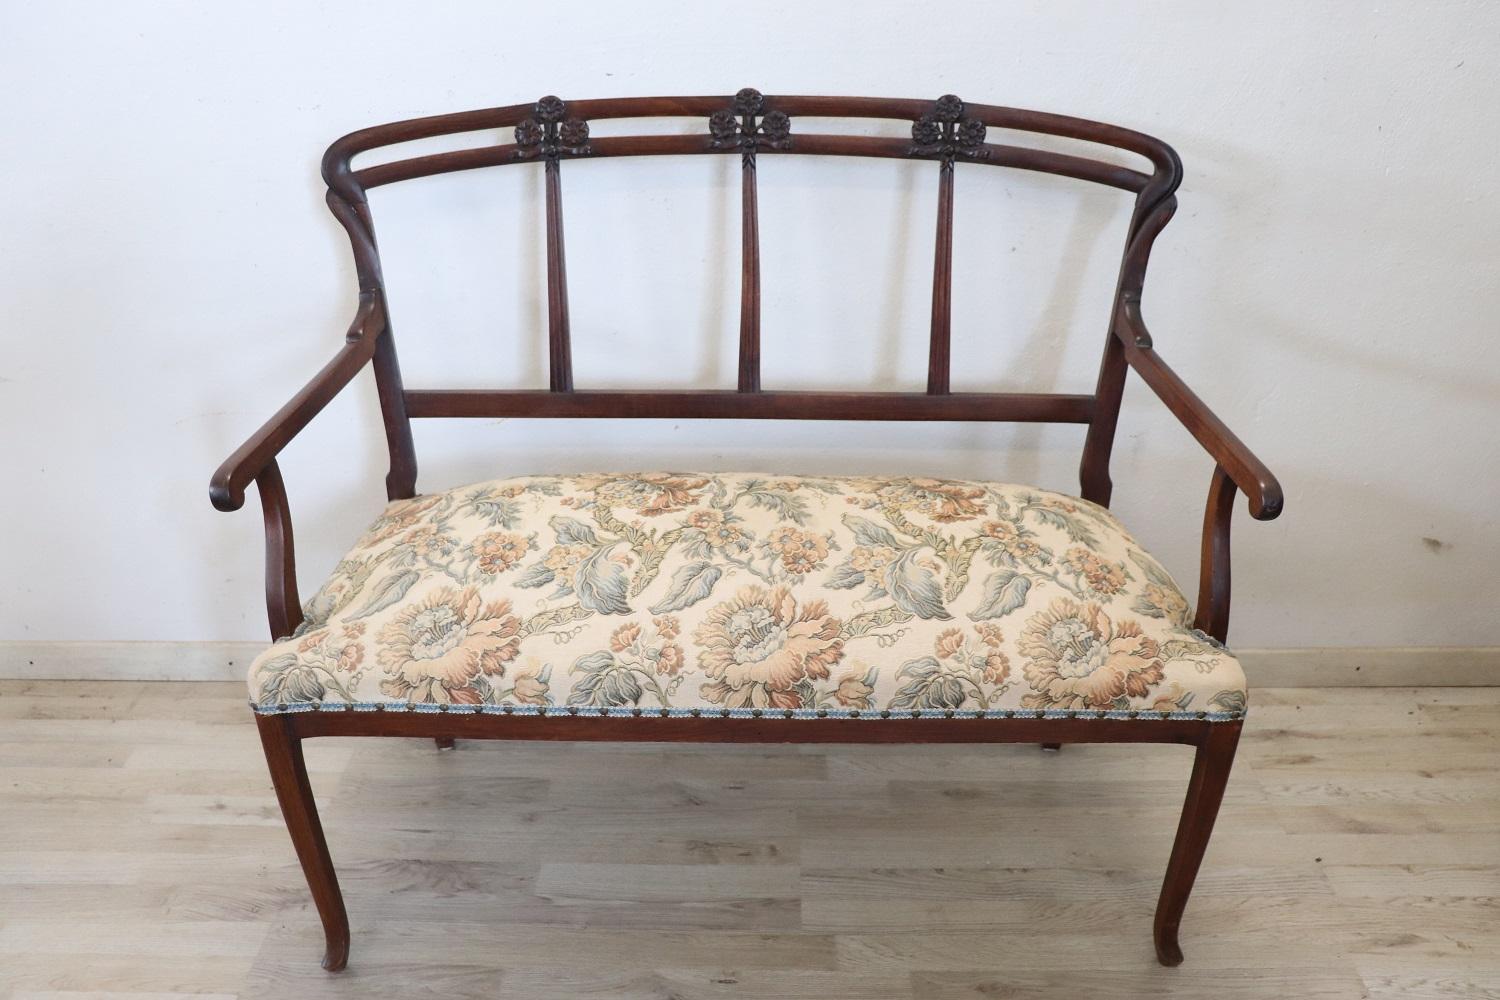 Rare complete Italian Art Nouveau 1900s living room set includes:
1 sofa
2 armchairs
2 chairs

Refined living room set in carved beech wood. The wood has an elegant carved decoration with wavy lines and floral elements typical of the Art Nouveau